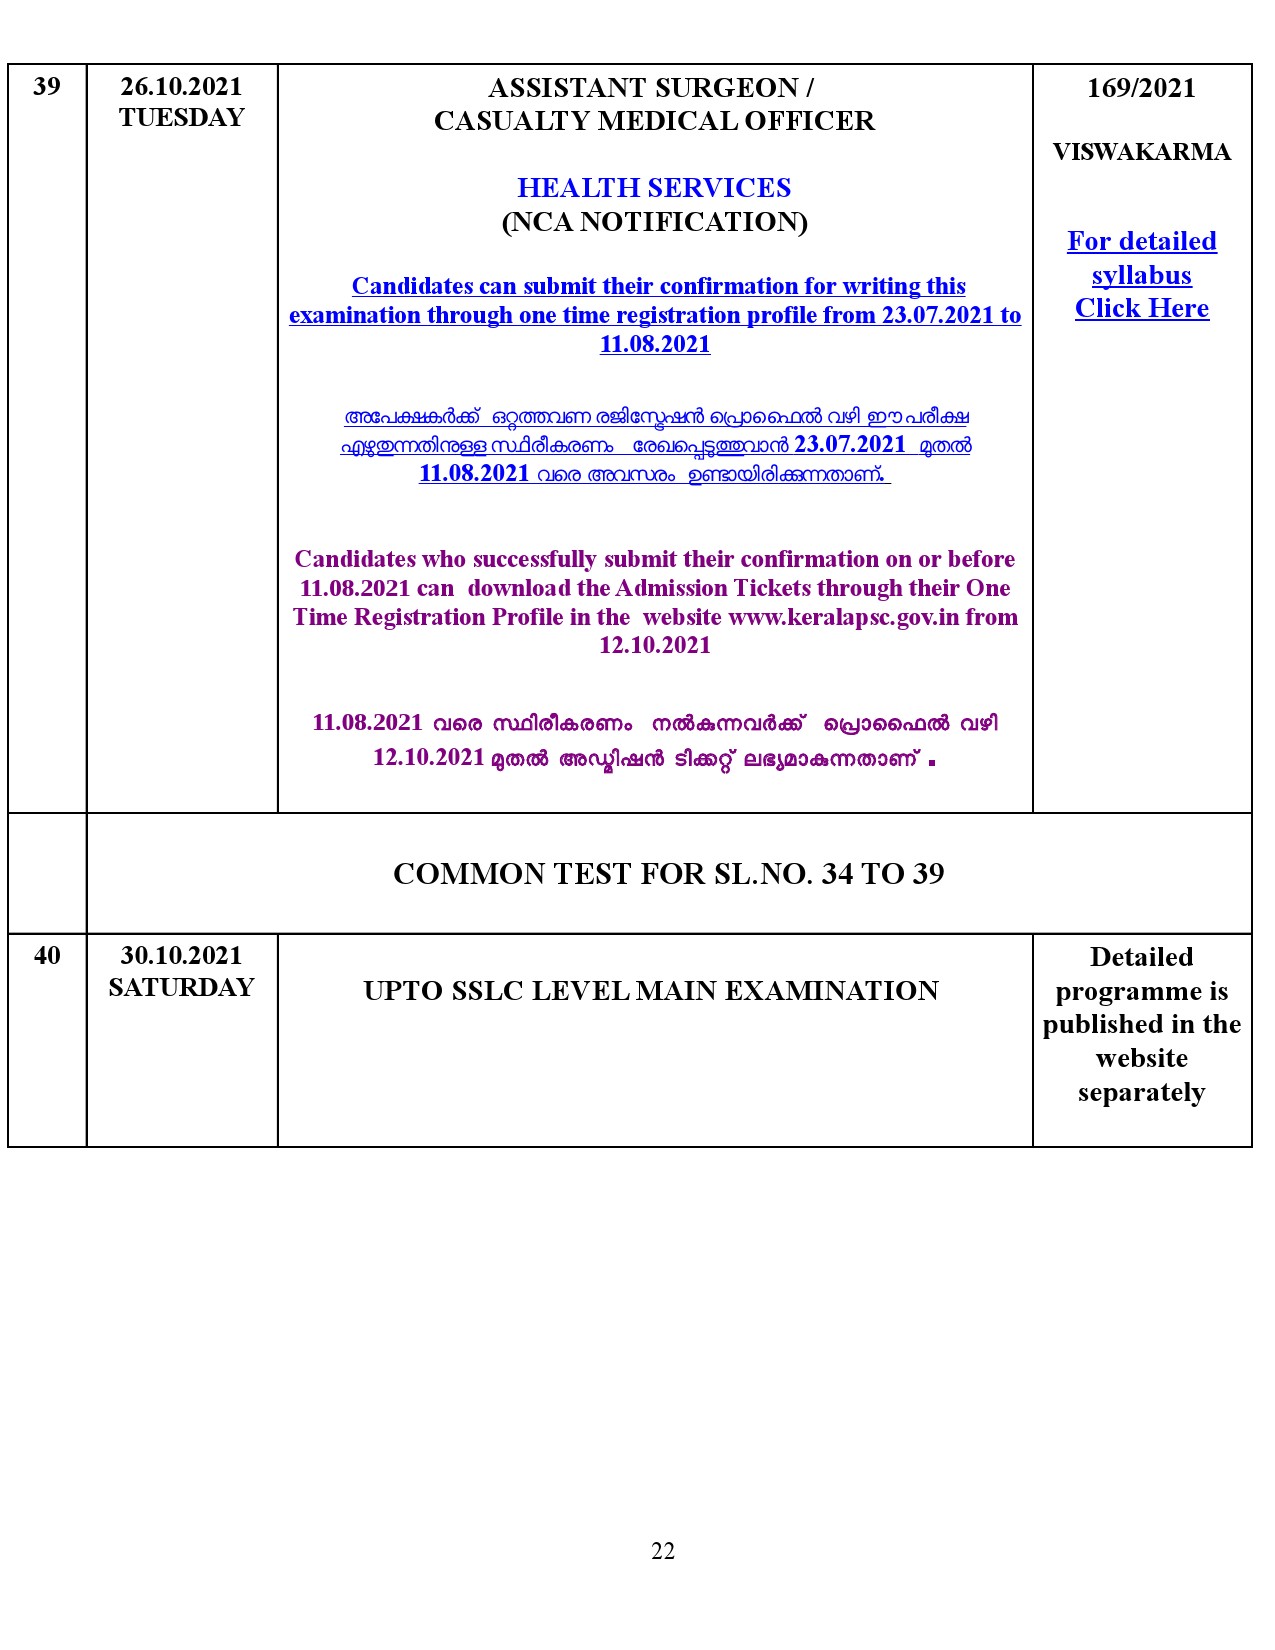 KPSC Examination Programme For The Month Of October 2021 - Notification Image 22